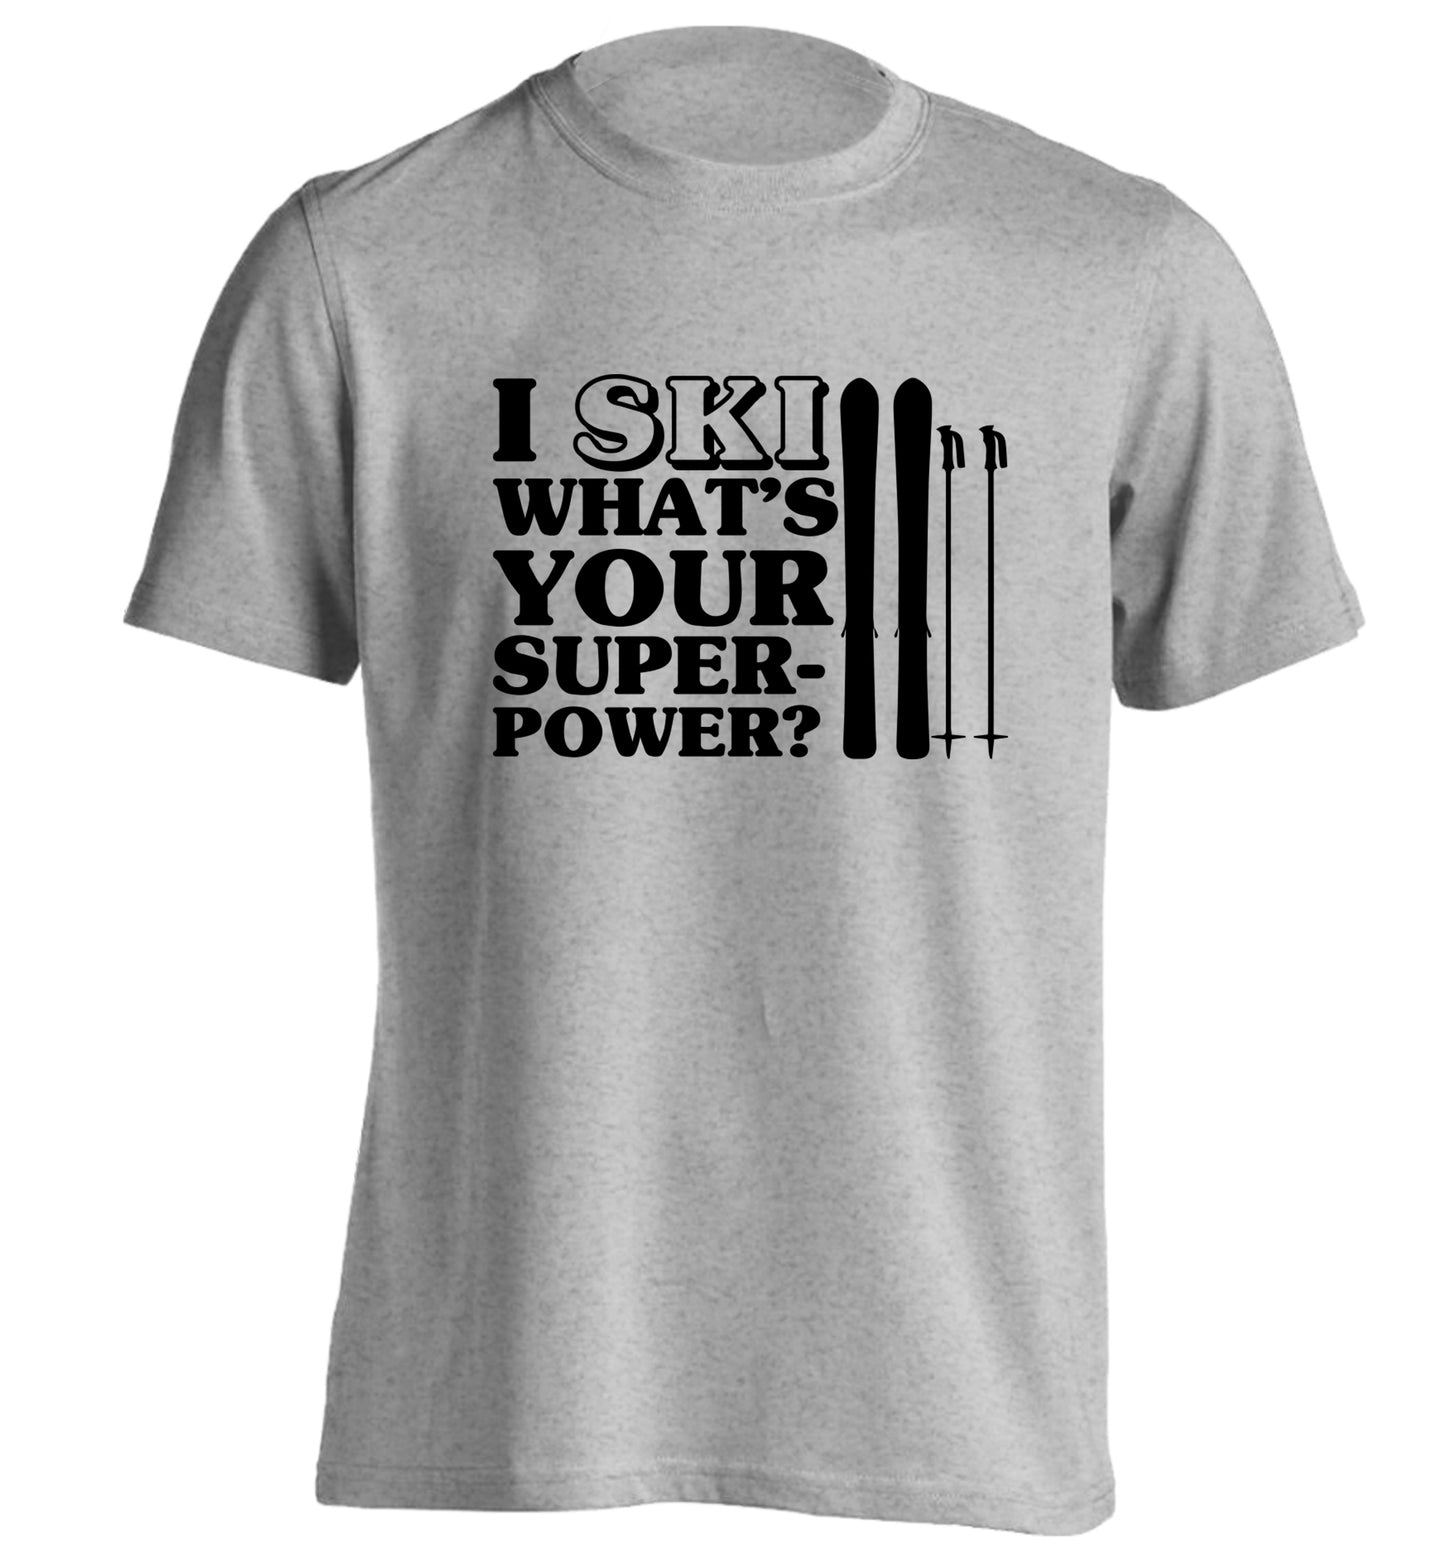 I ski what's your superpower? adults unisexgrey Tshirt 2XL